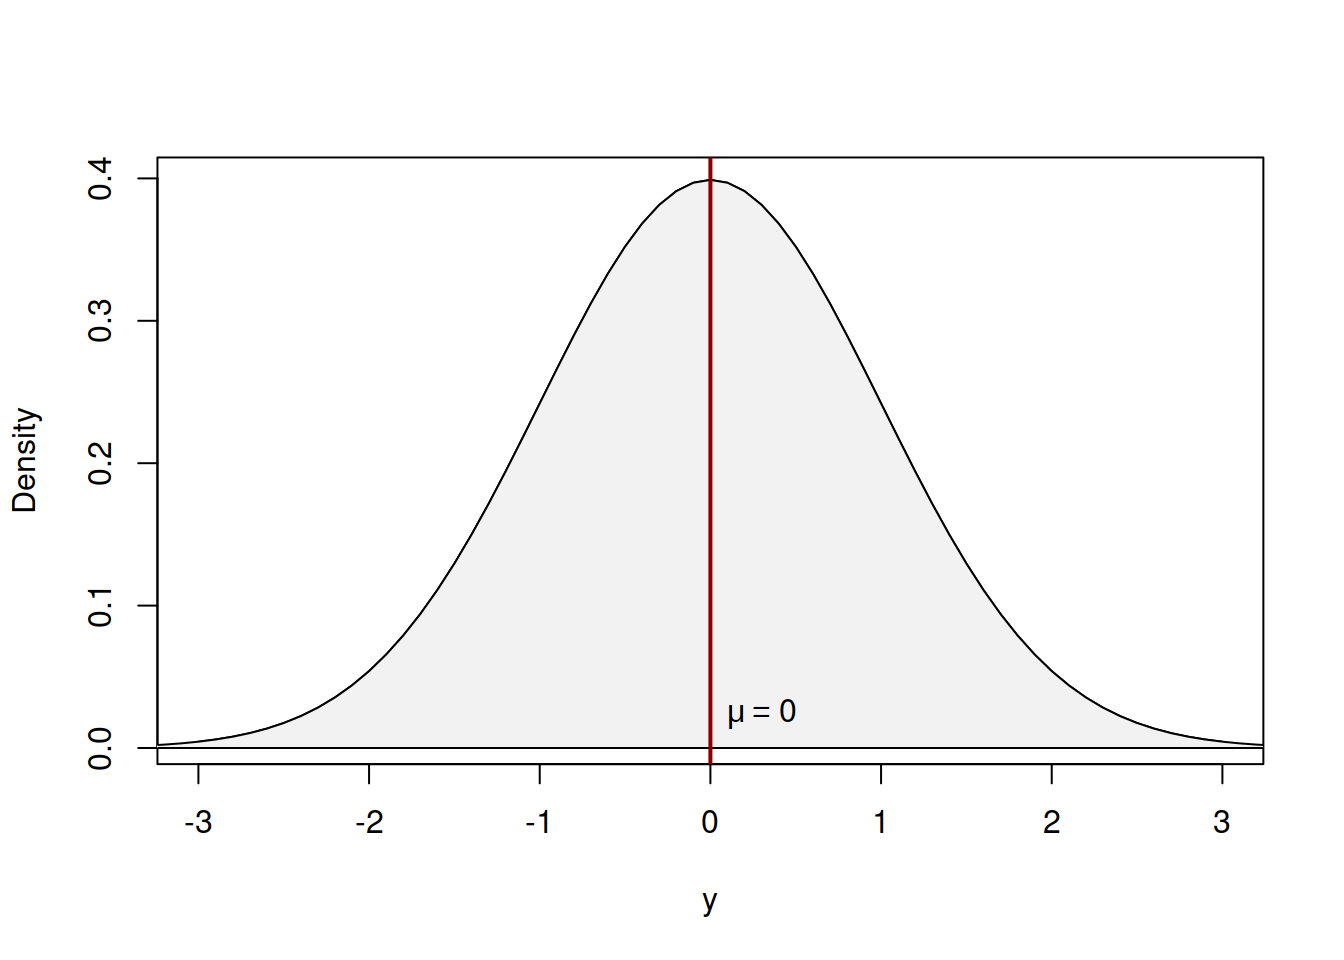 Probability Density Function of Standard Normal distribution